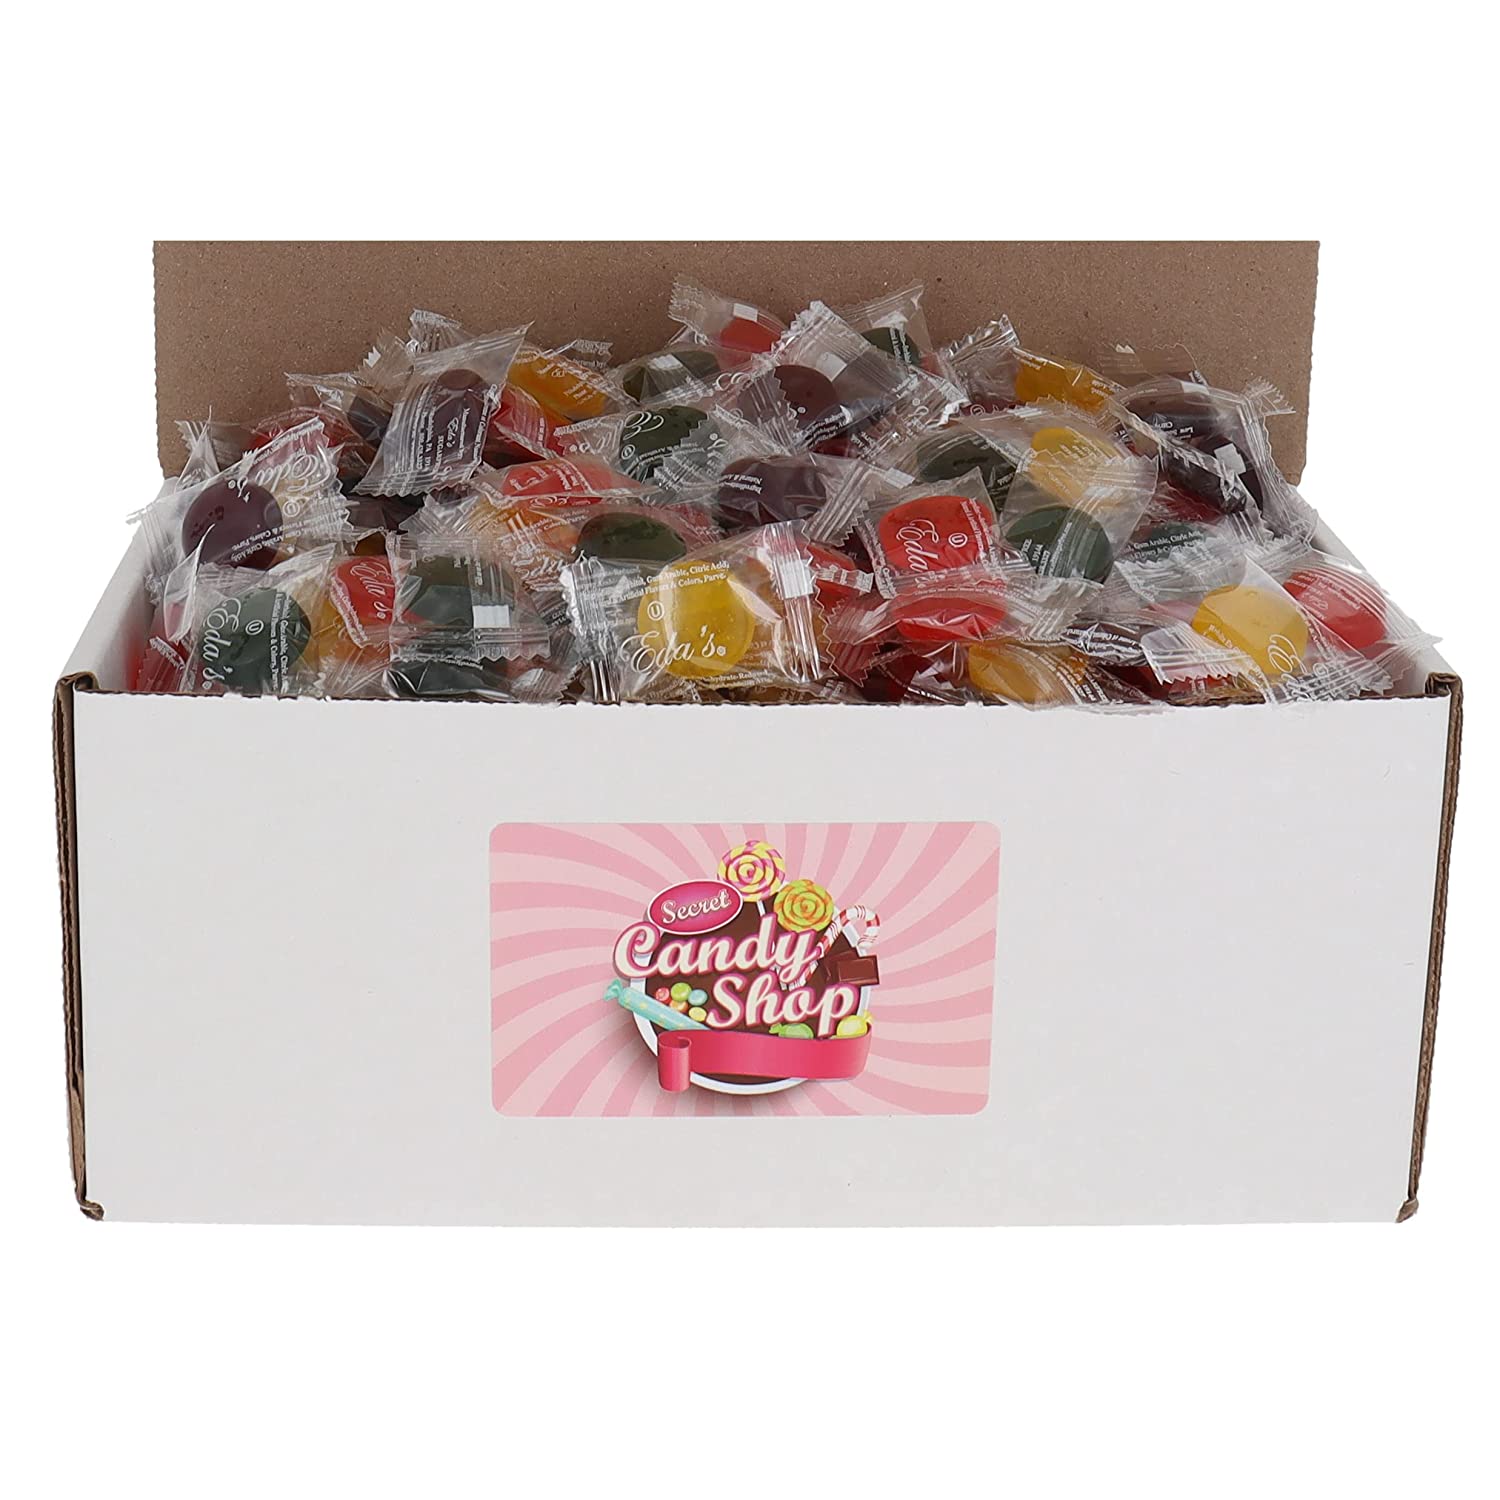 Eda's Sugar Free Hard Candy - Assorted Sour